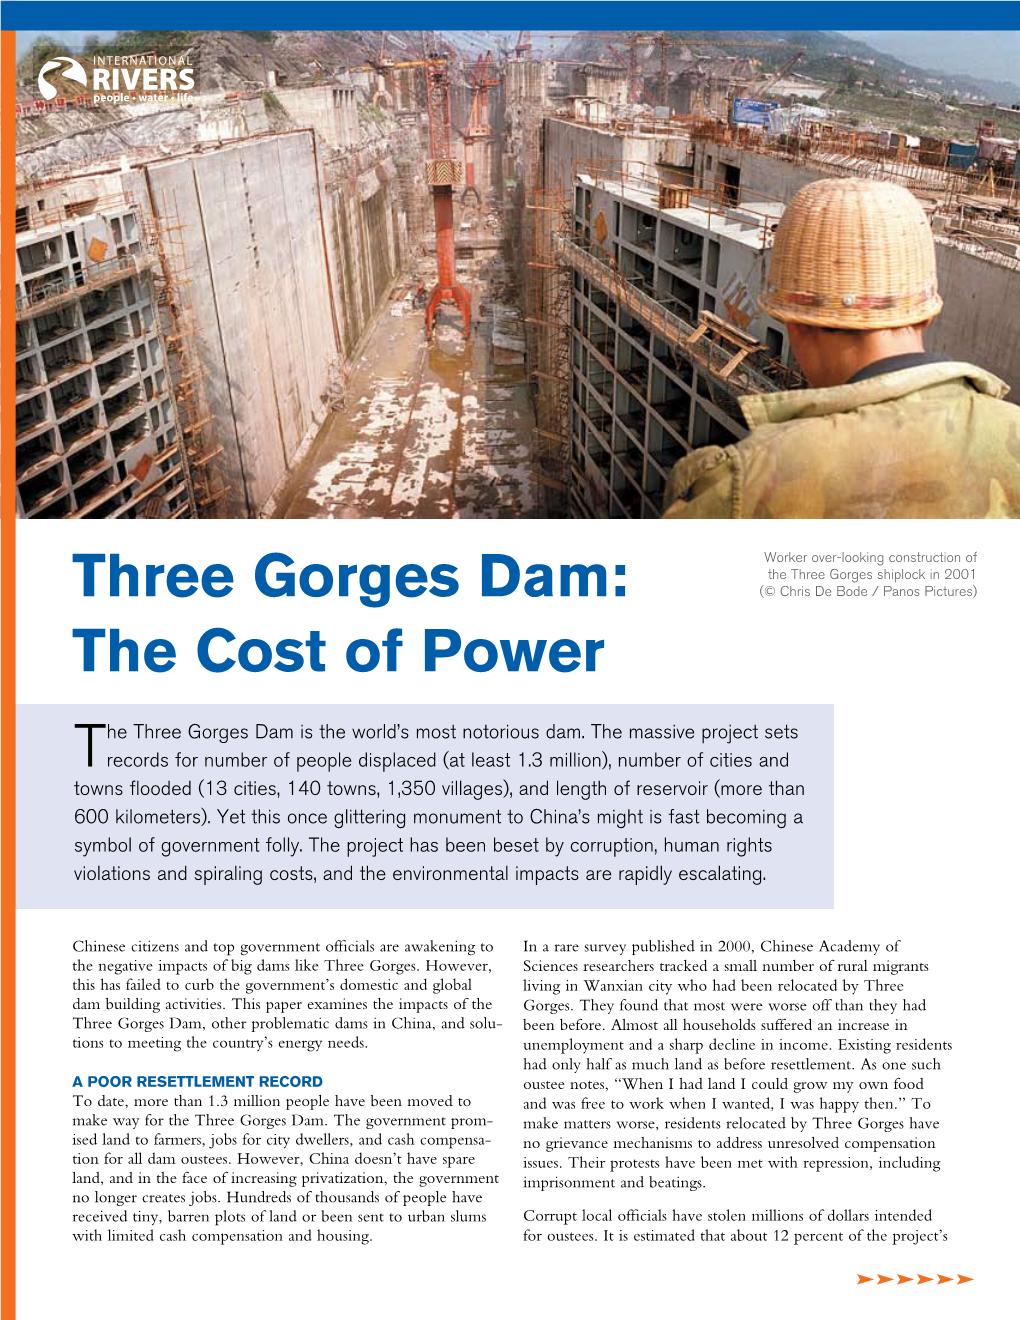 Three Gorges Shiplock in 2001 Three Gorges Dam: (© Chris De Bode / Panos Pictures) the Cost of Power